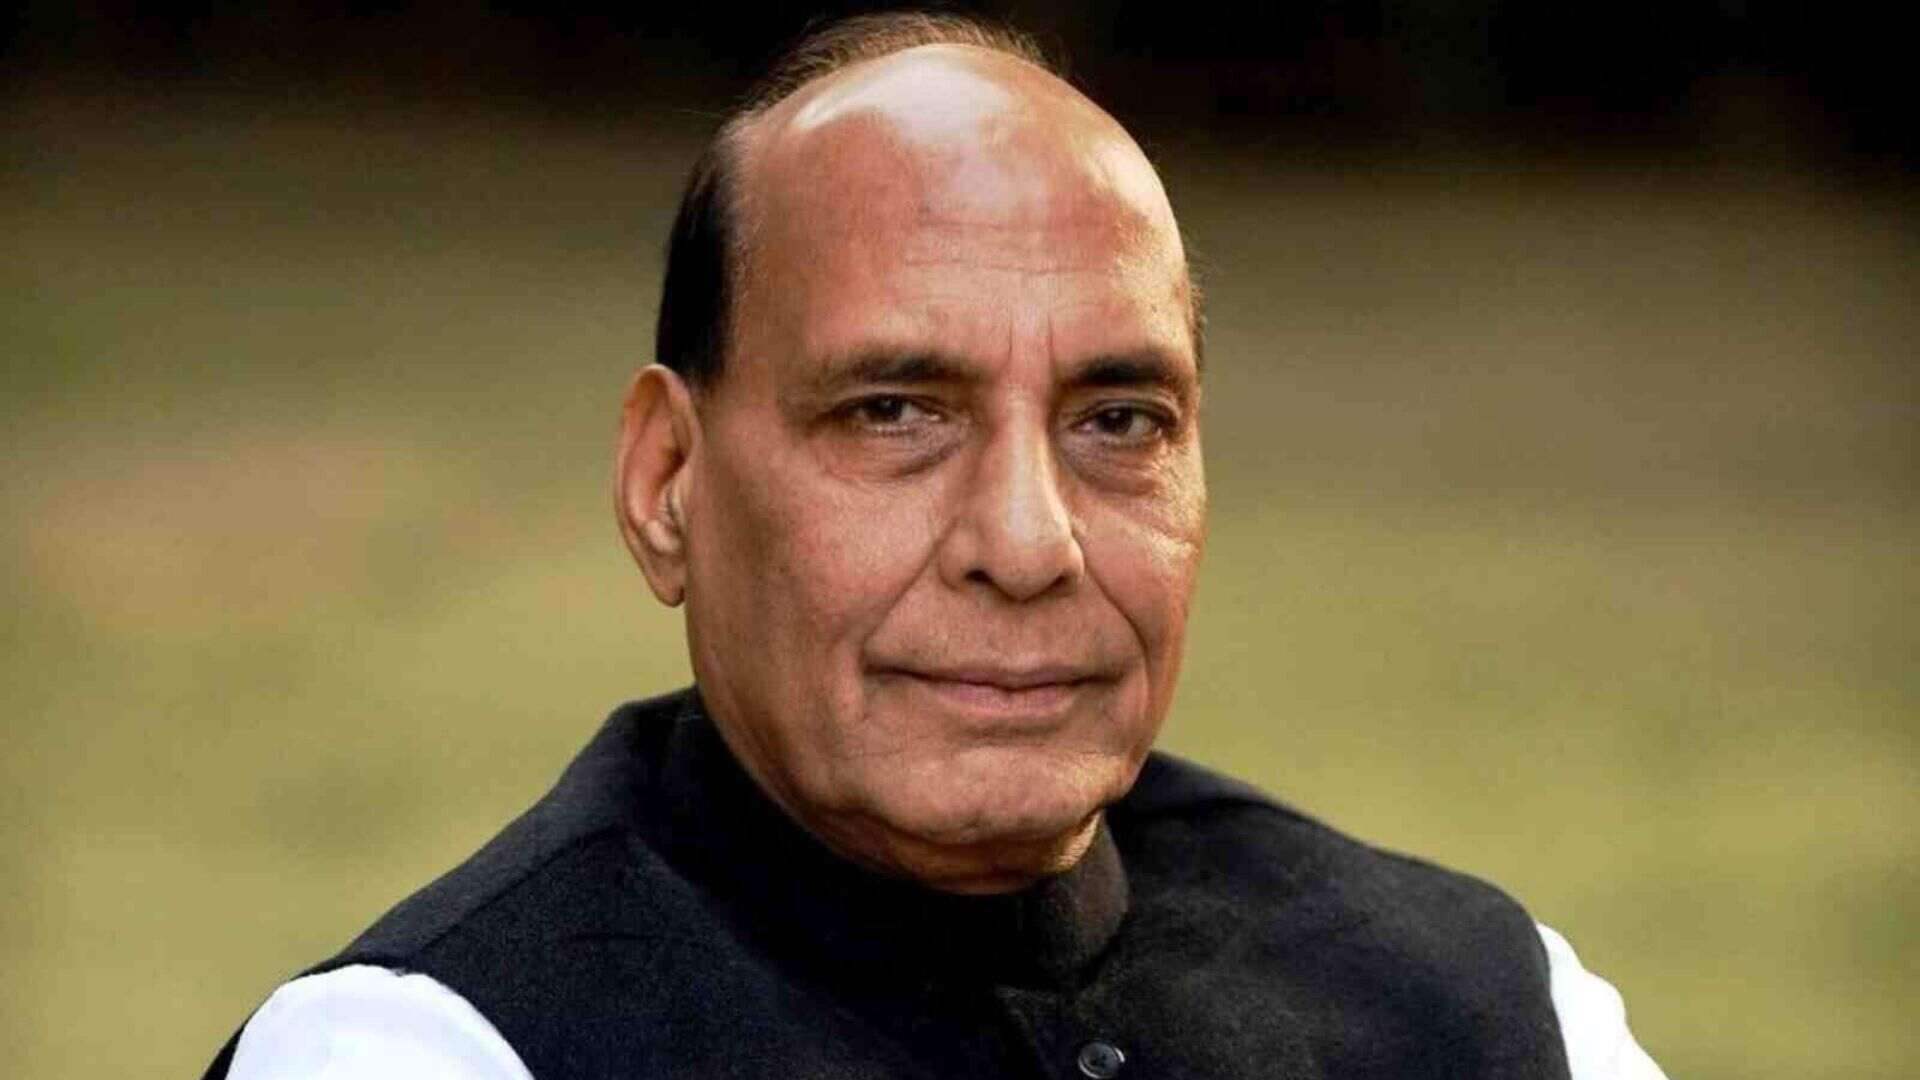 Rajnath Singh, Mallikarjun Kharge, and Other Leaders Condole Tragic Loss of Five Indian Army Soldiers